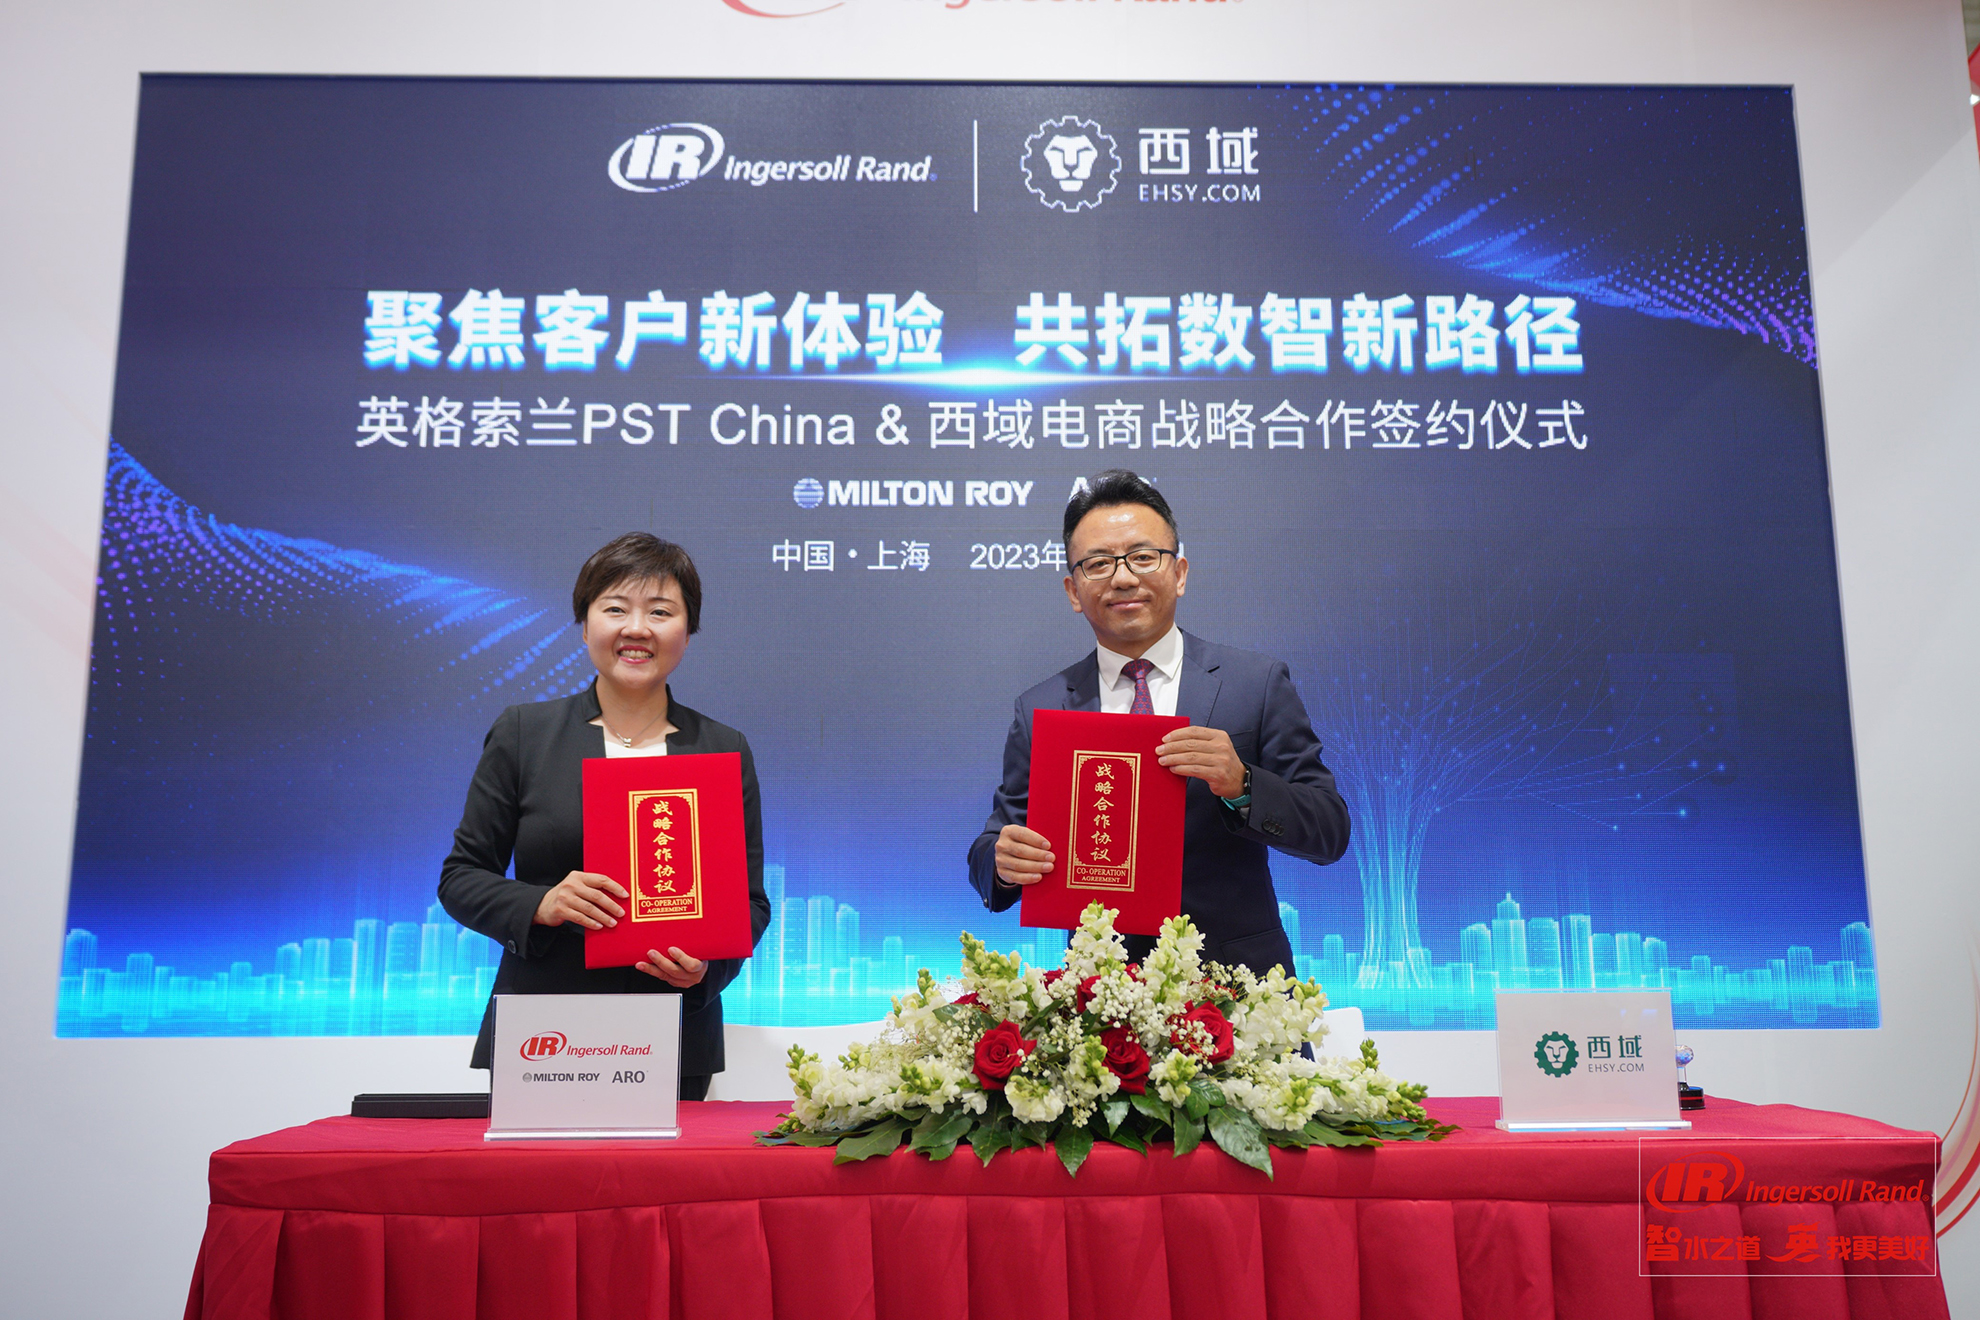 Ingersoll Rand PST China Partners with ZHSY